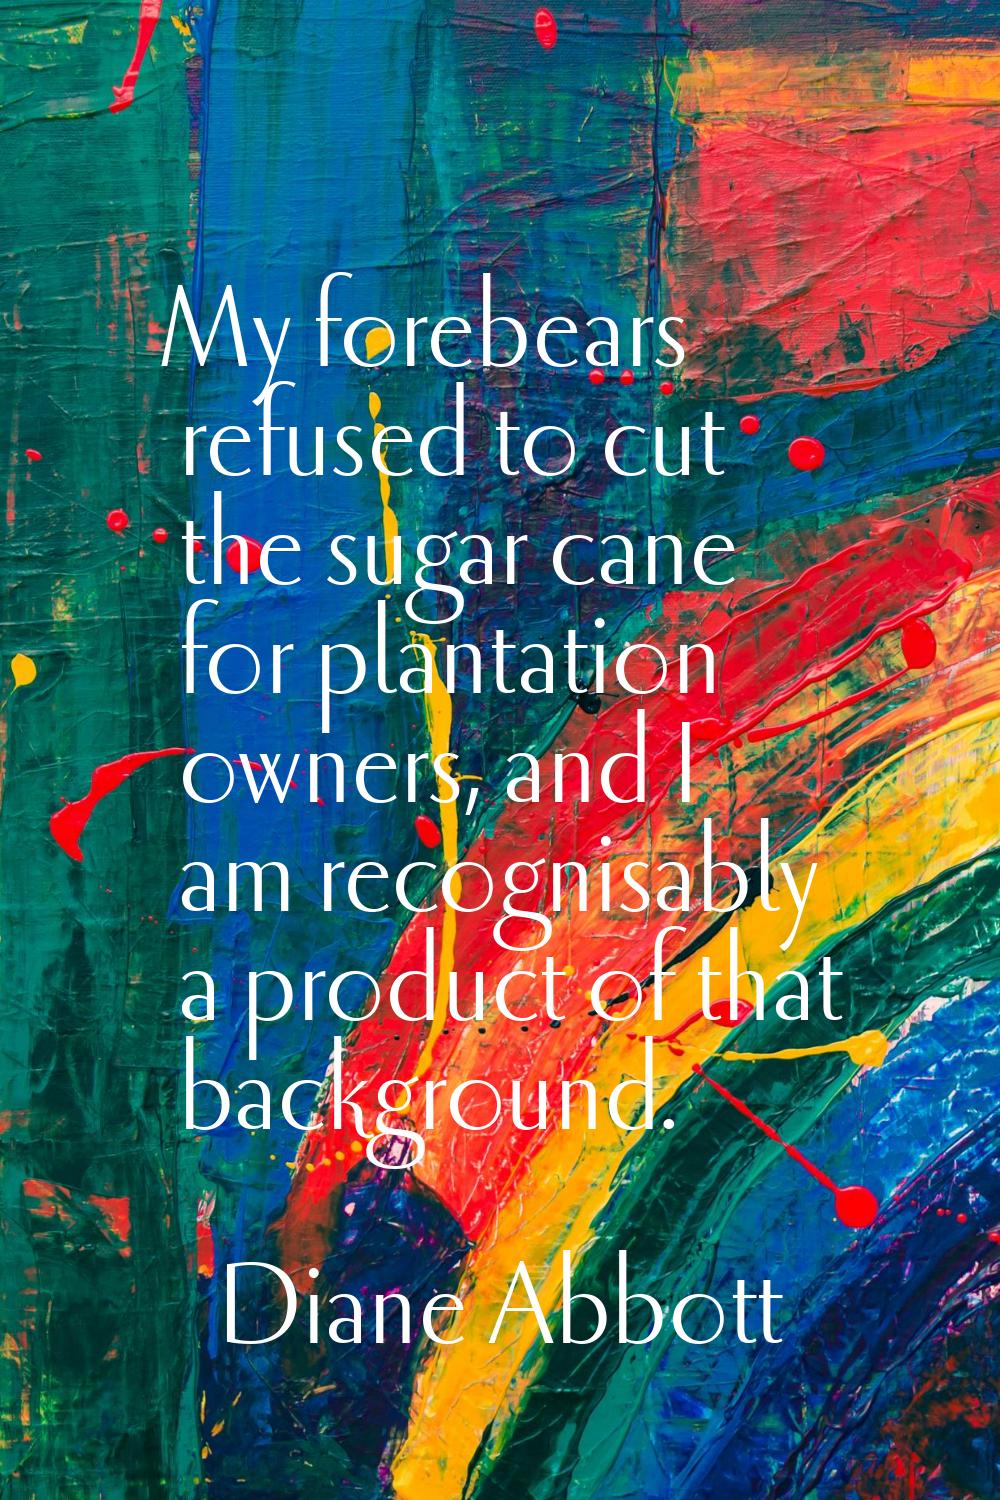 My forebears refused to cut the sugar cane for plantation owners, and I am recognisably a product o